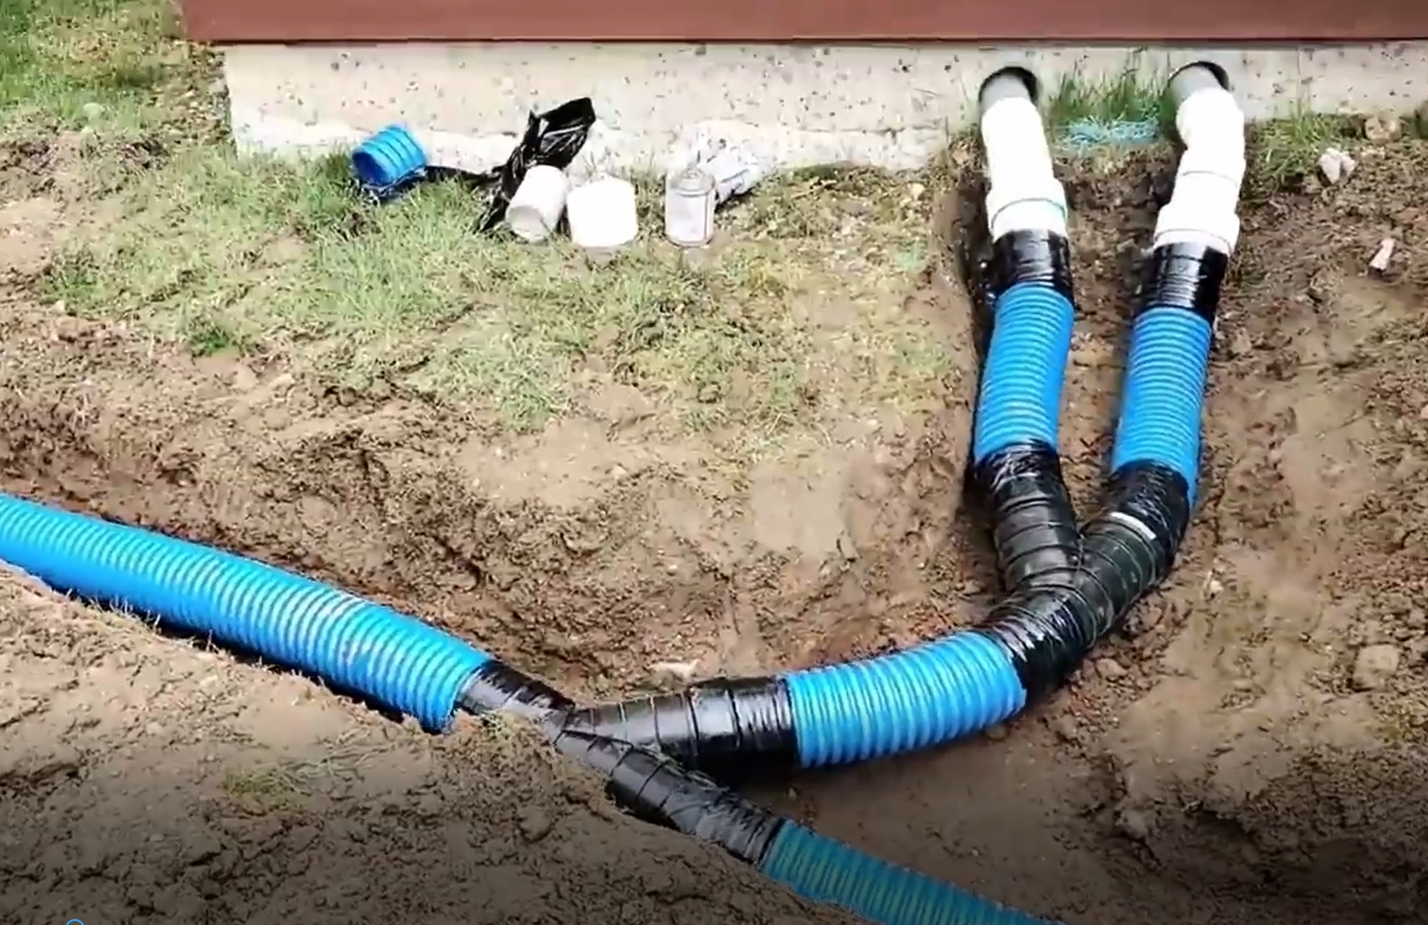 How to Bury Downspouts: 5 Tips from the Pros